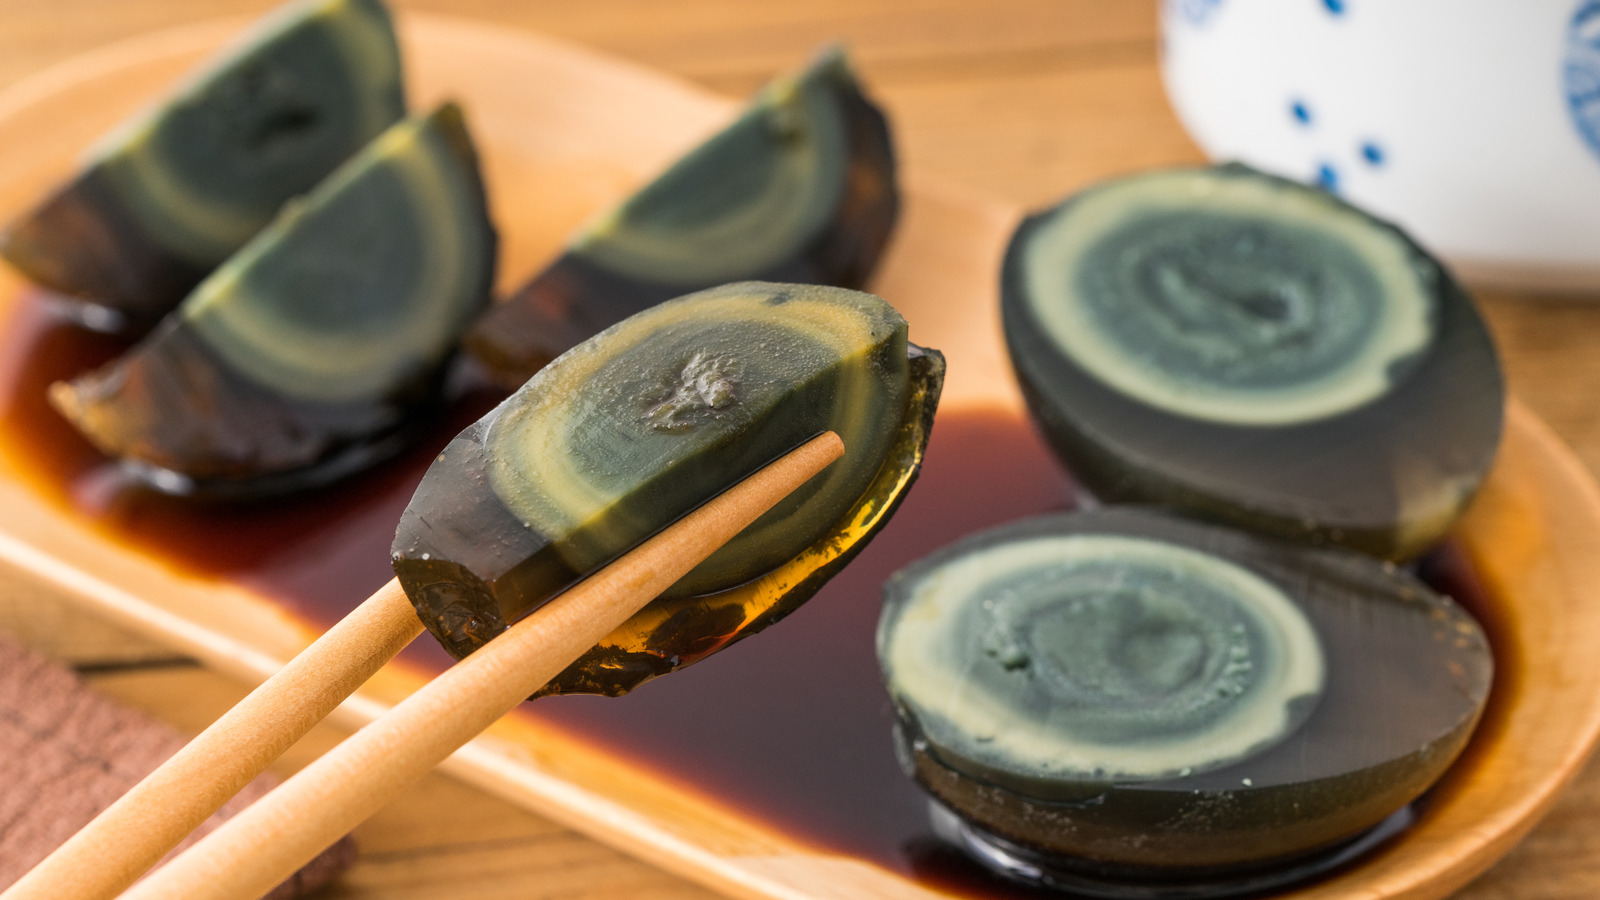 Is century egg really 100 years old?